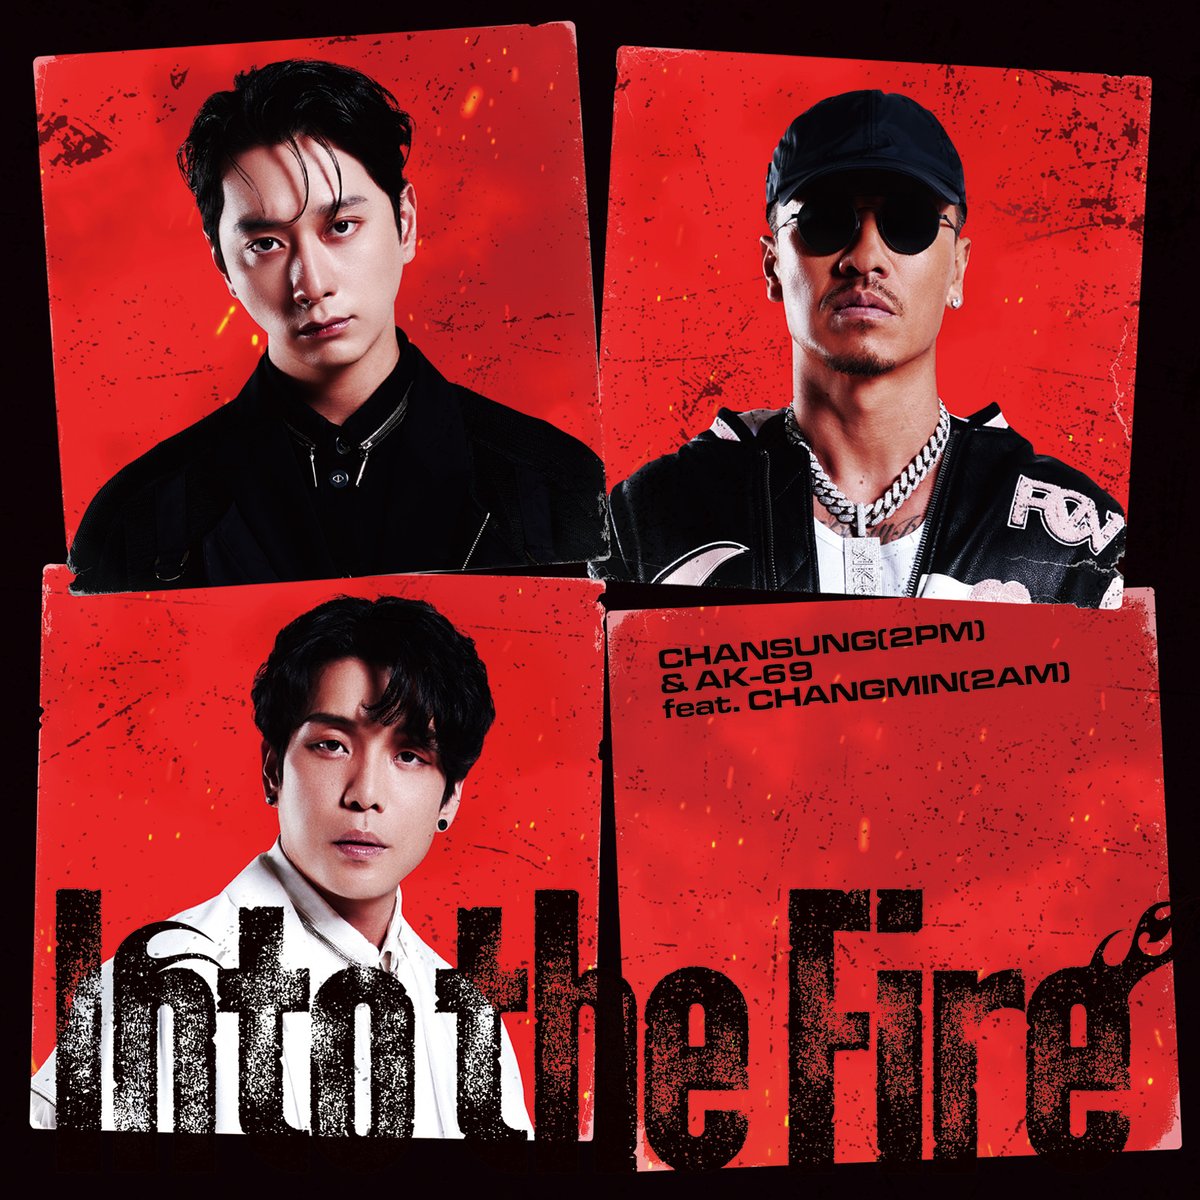 【CHANSUNG(2PM) 　　　& AK-69 feat. CHANGMIN(2AM)】 💥遂に来週発売!! ￣￣￣￣￣￣￣￣ 4.24 Single💿『#Into_the_Fire』 🎁特典：ランダムフォトカード アニメ「Re : Monster」の オープニング主題歌🎧 🛒buff.ly/3V0Tnke #CHANSUNG #チャンソン #찬성 #remonster_anime